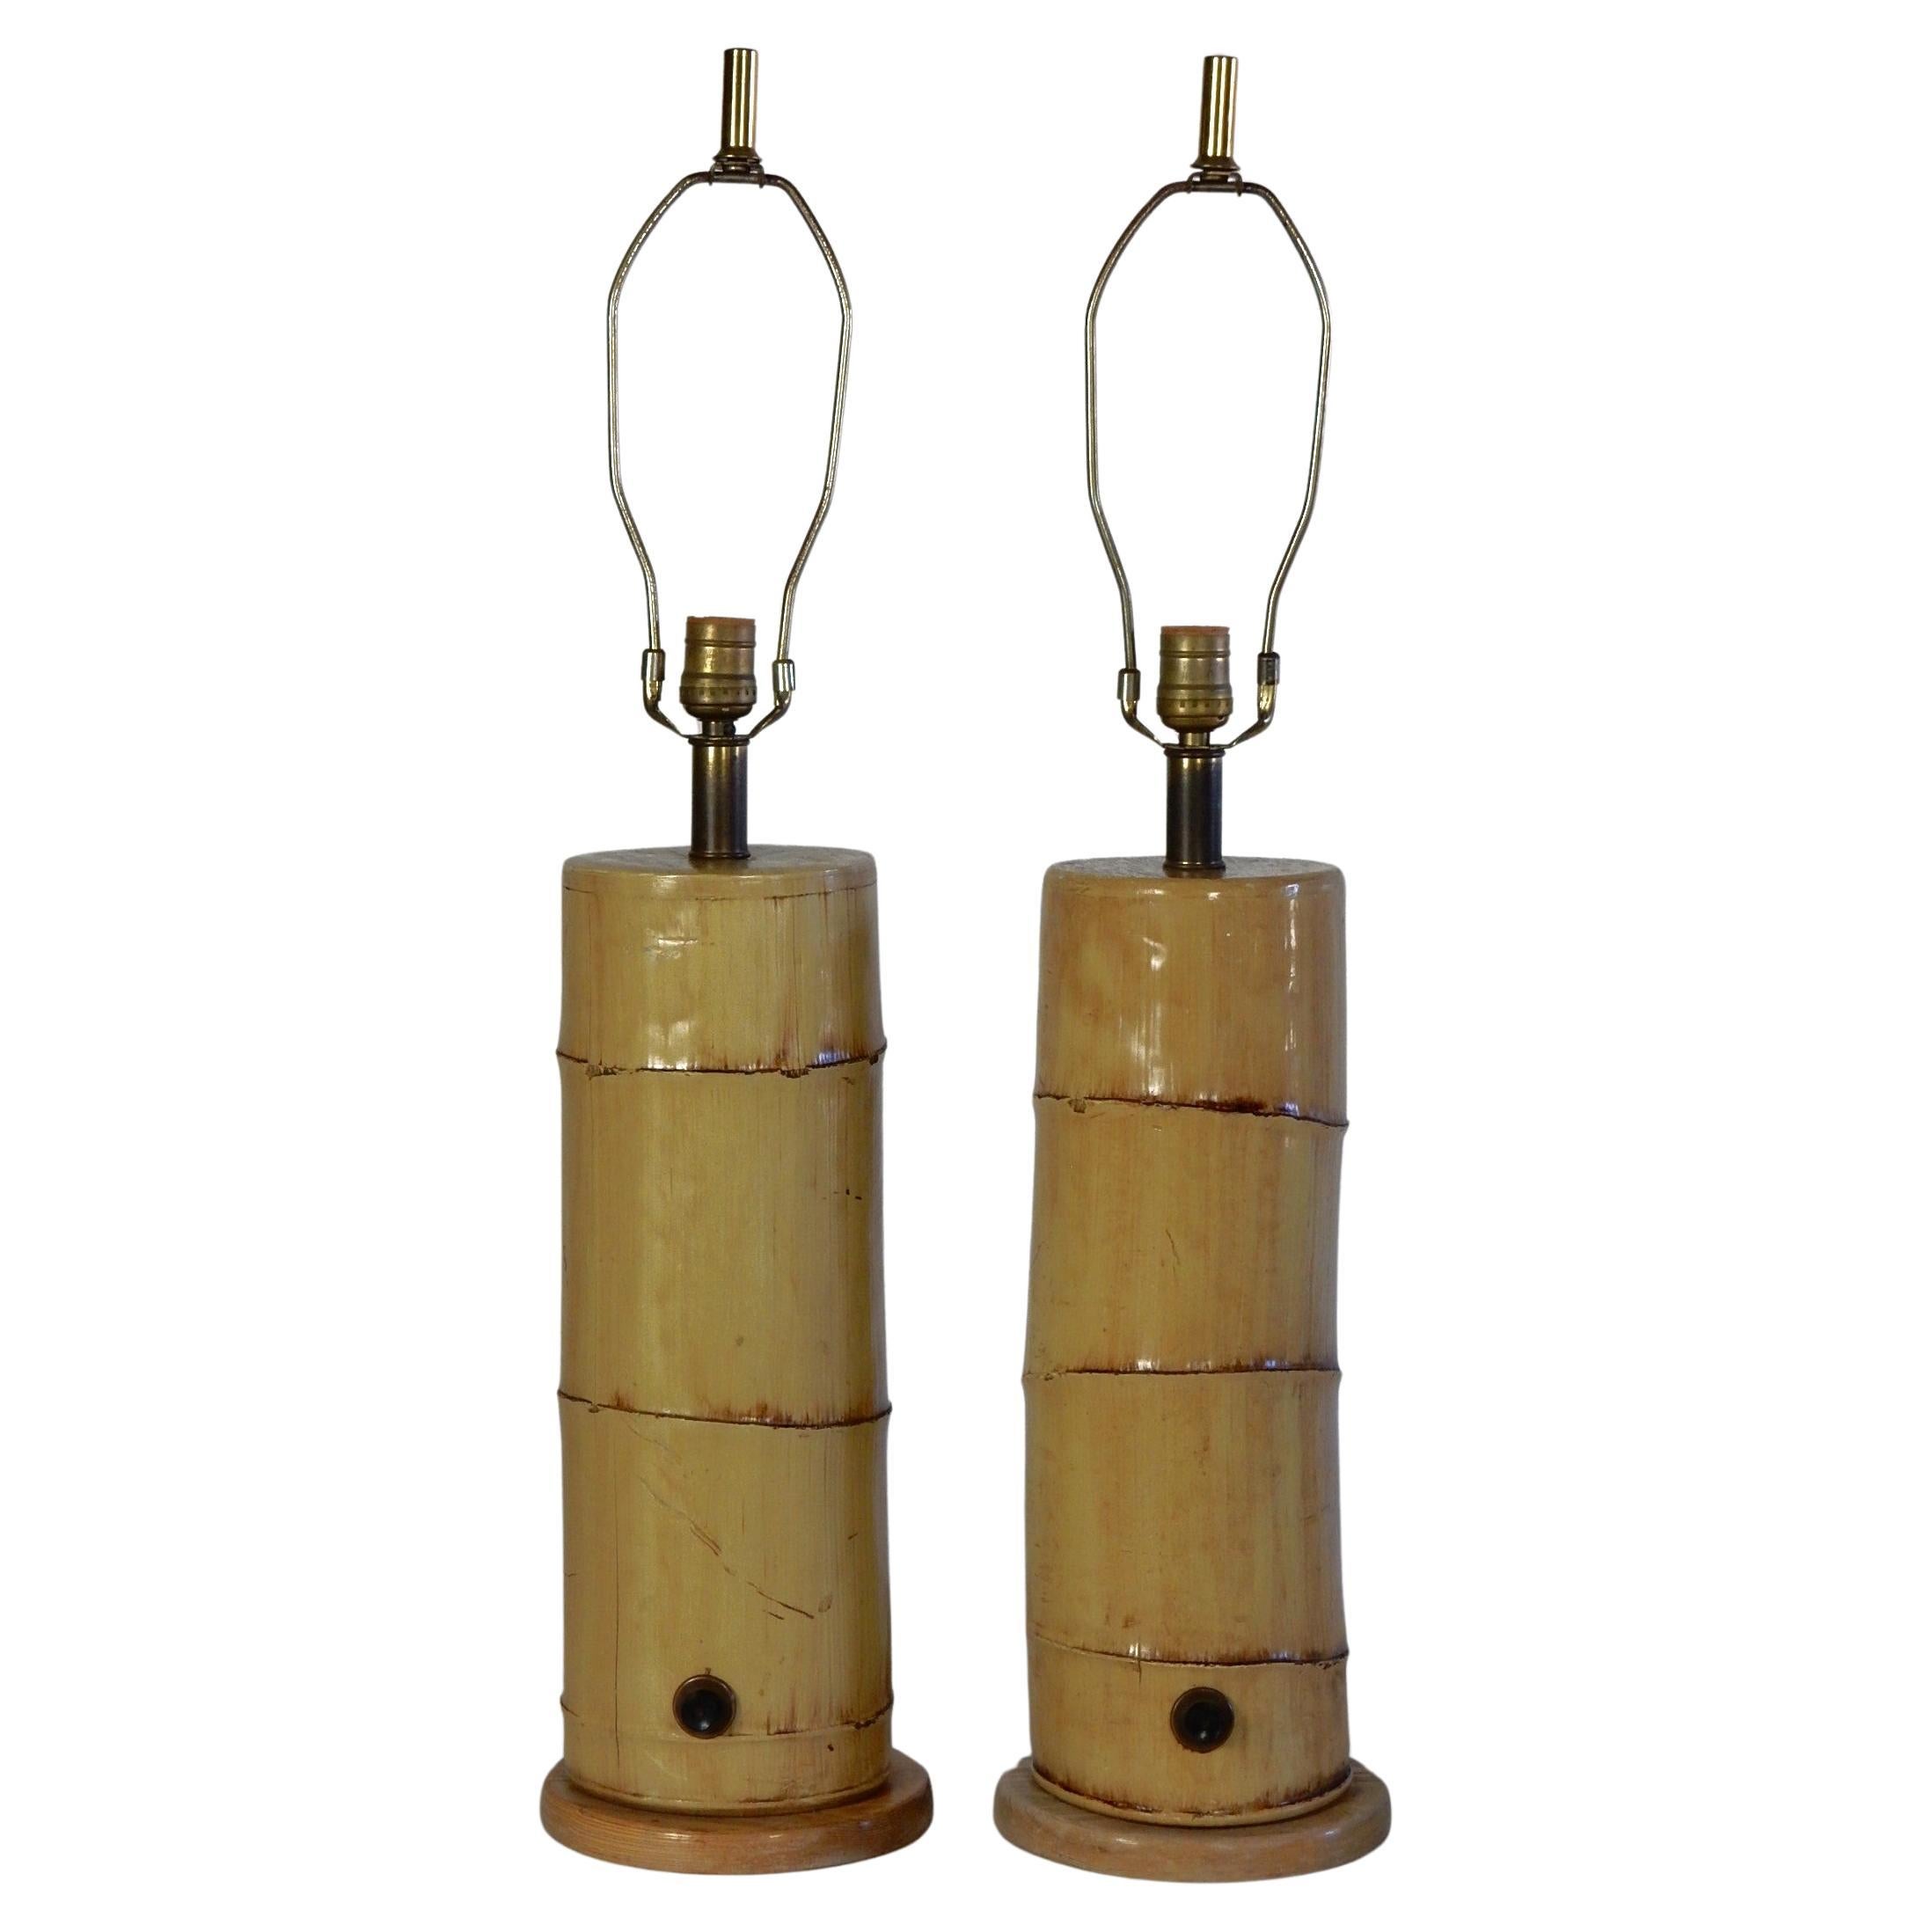 Large heavy pair of vintage 1960's faux bamboo stalk table lamps
from the Moana Hotel in Honolulu Hawaii. We believe they are solid plaster and mounted on an oak wood base. Original on/off switch on the lower portion. They measure 32in to tip of